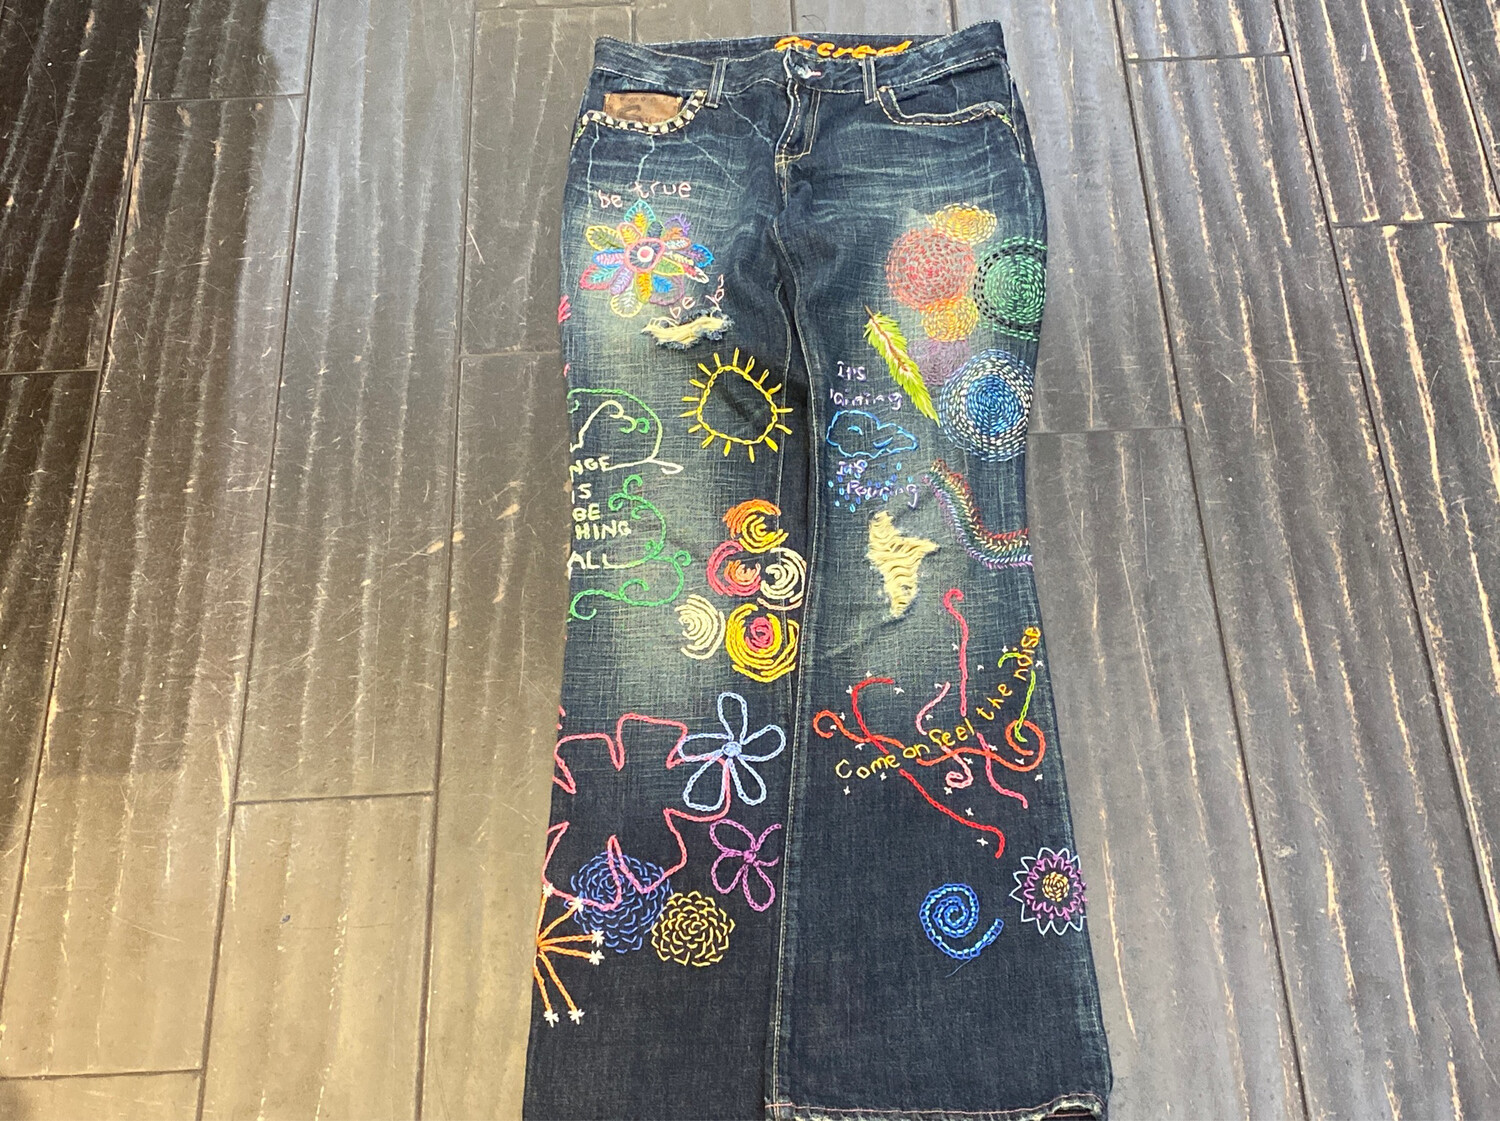 ESIAAM Embroidered Jeans, 27, Sacred, Upcycled